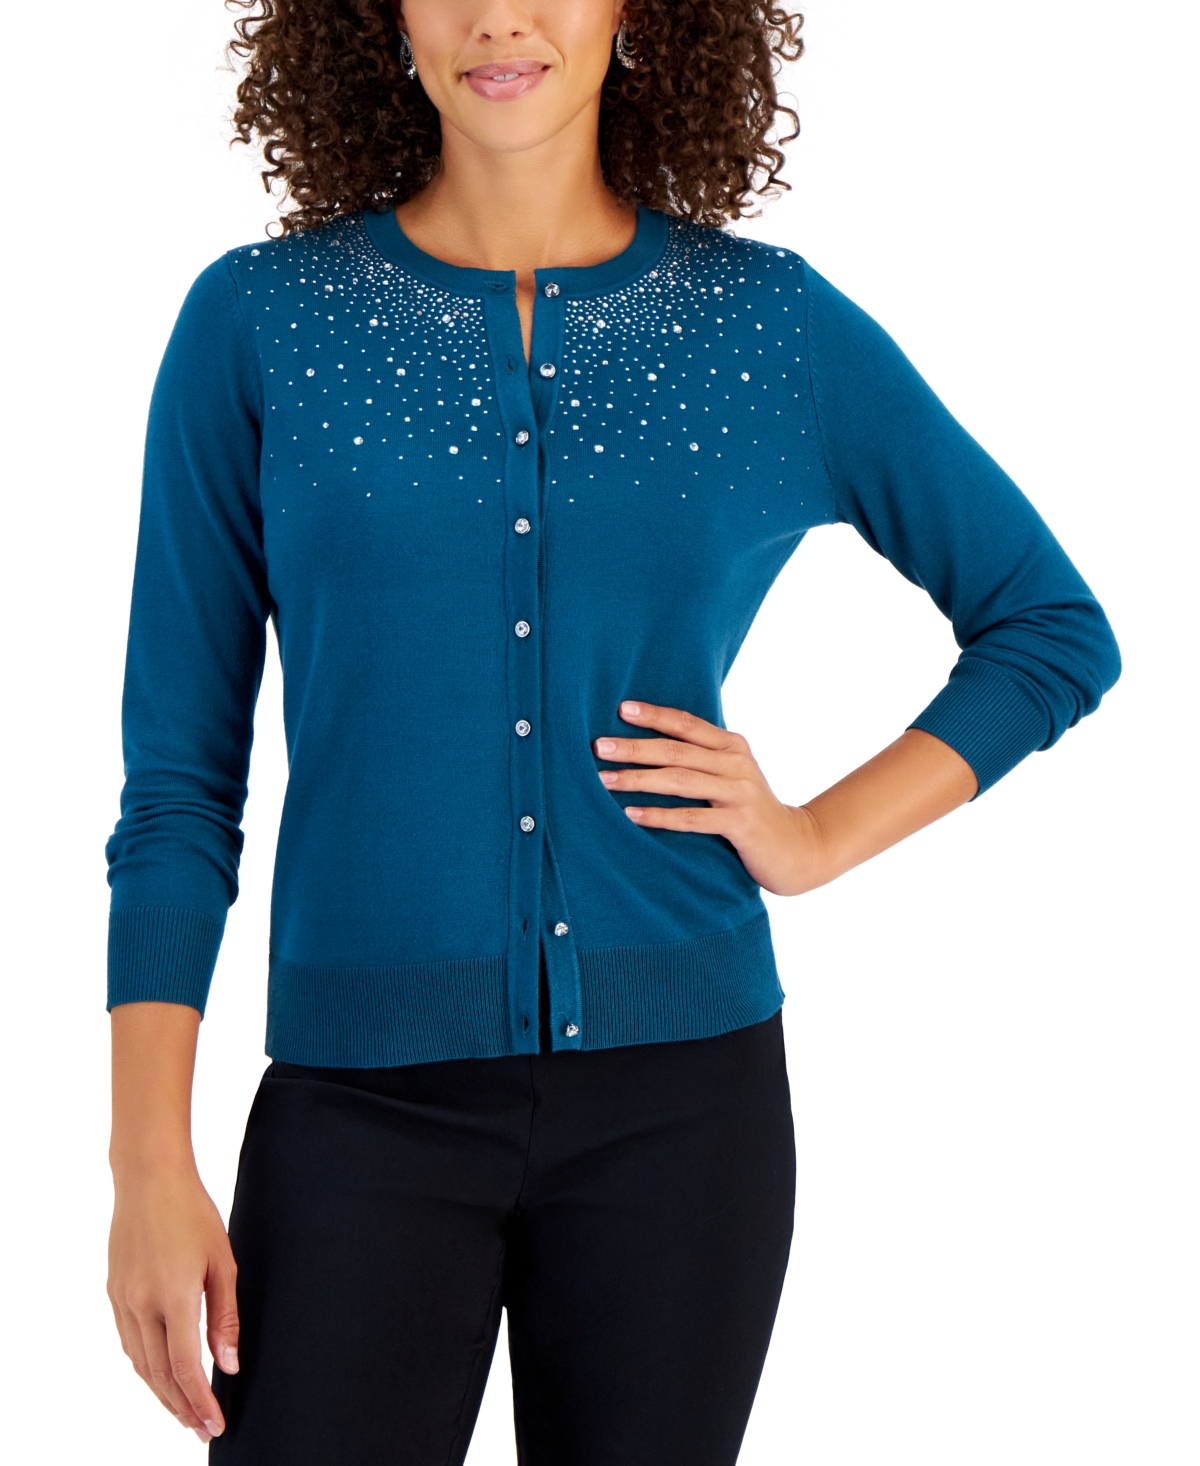 Jm Collection Women's Embellished Button Cardigan, Created for Macy's